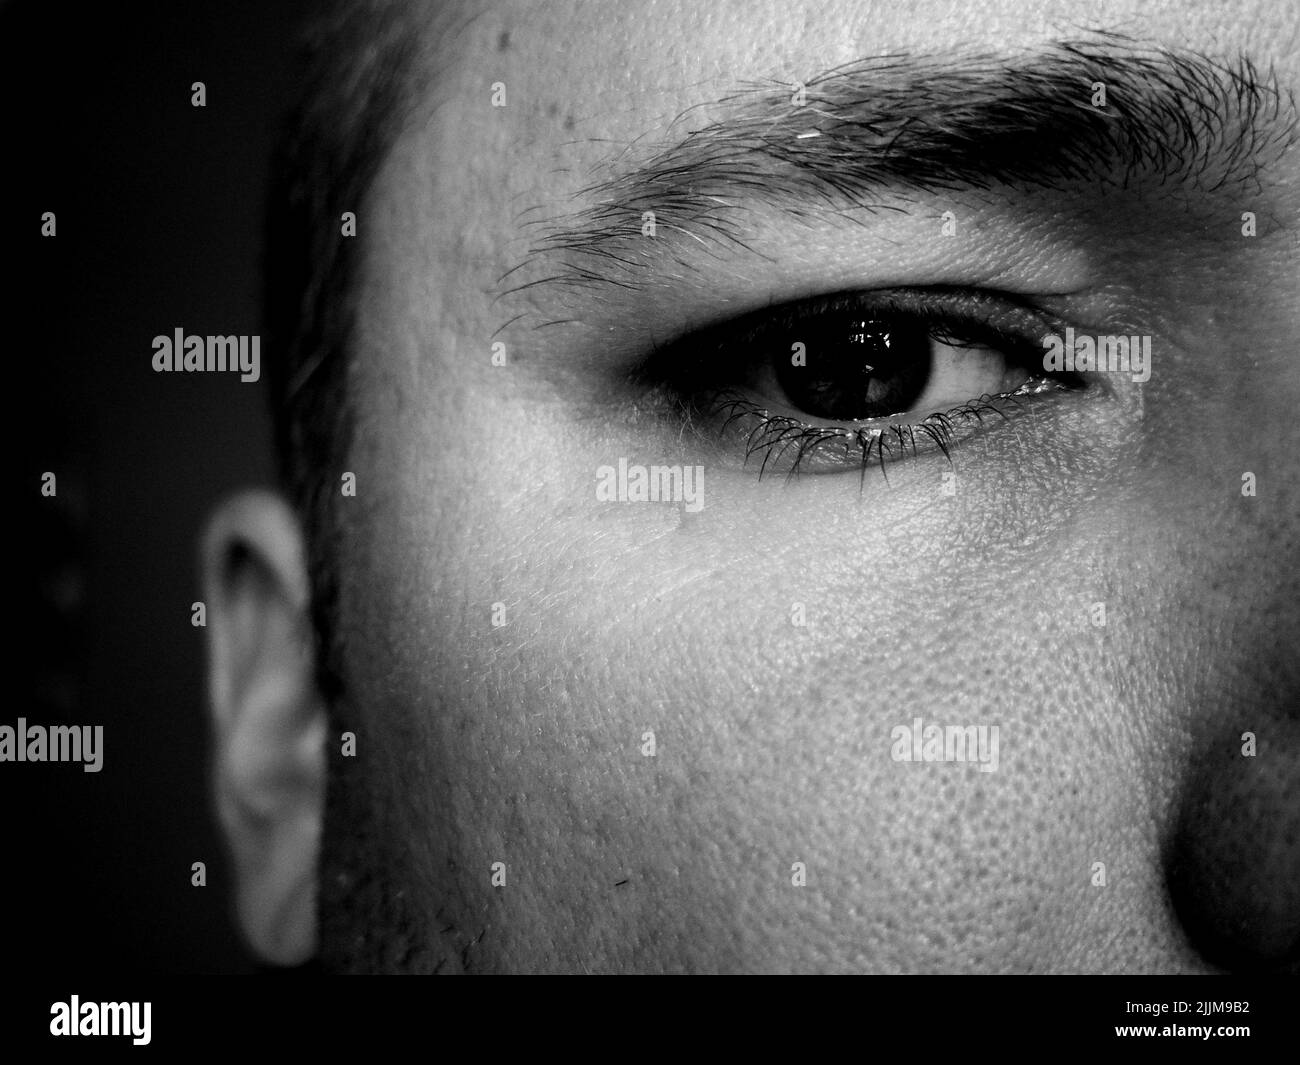 A grayscale closeup of the man's eye. Stock Photo